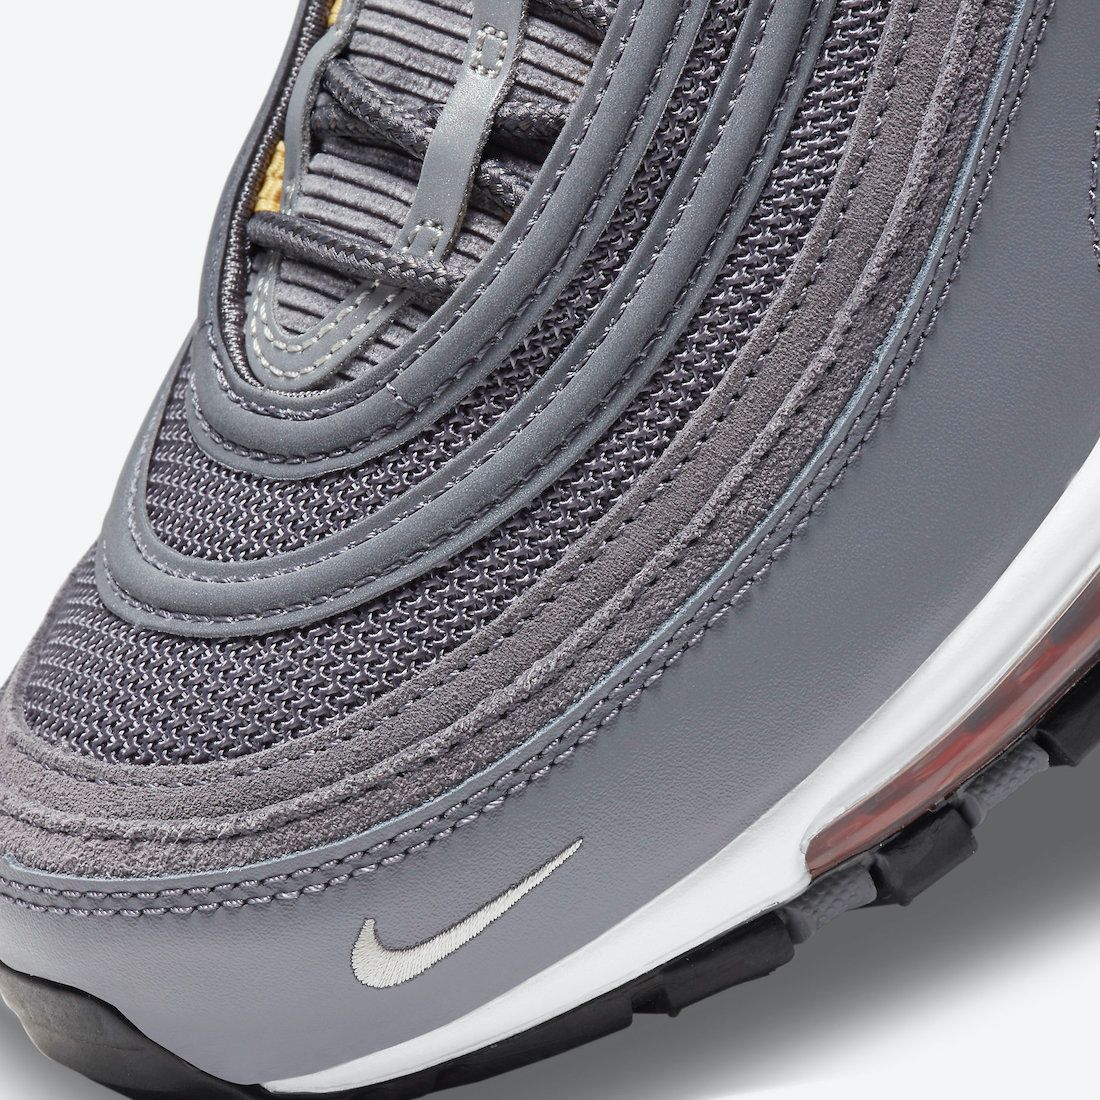 Nike Pull Inspiration From TV Colour Bars For the Air Max 97 